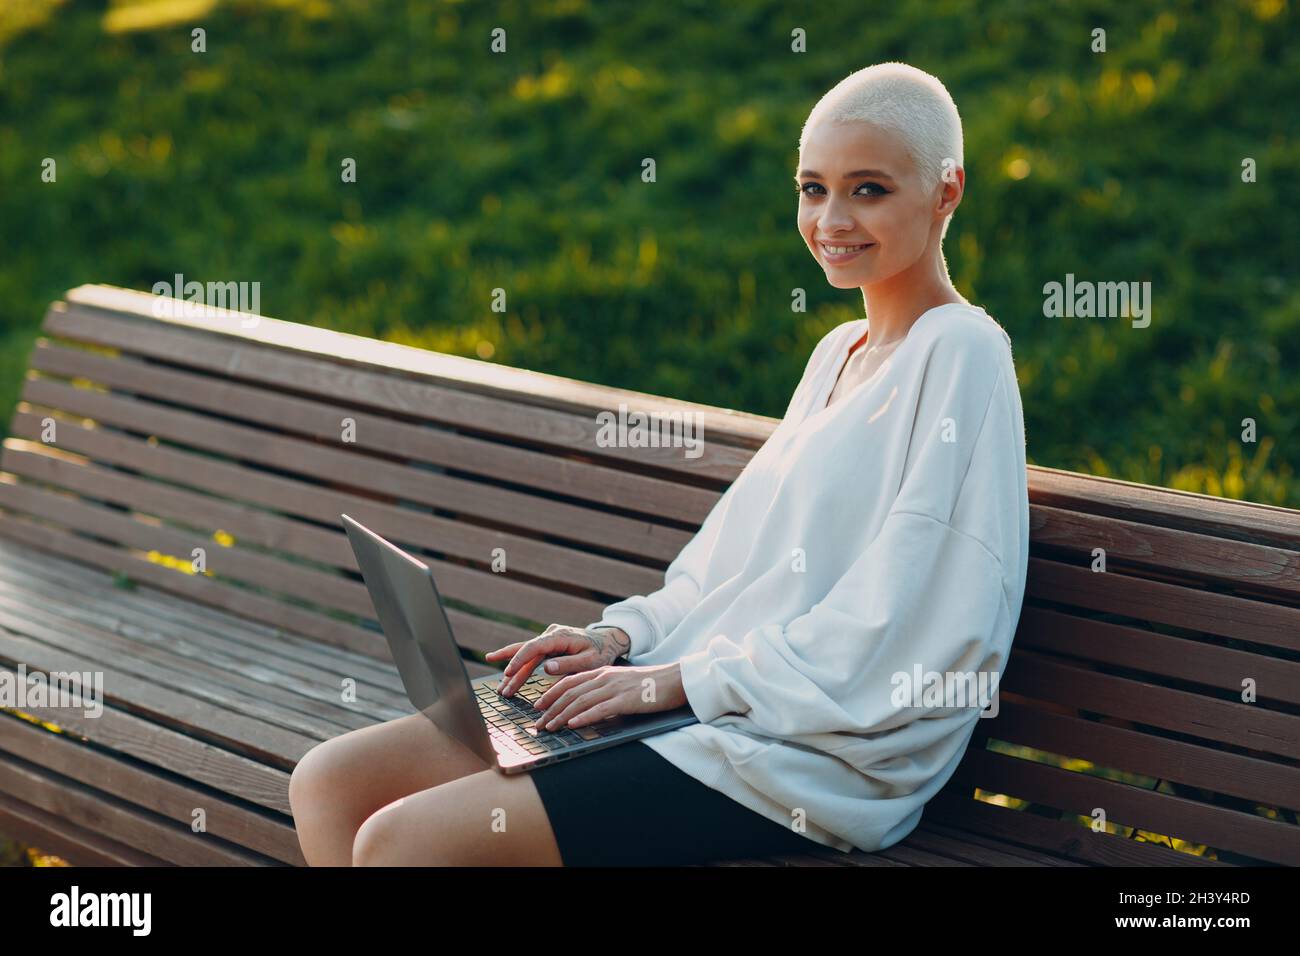 Millenial young woman blonde short hair outdoor smiling portrait with laptop. Stock Photo